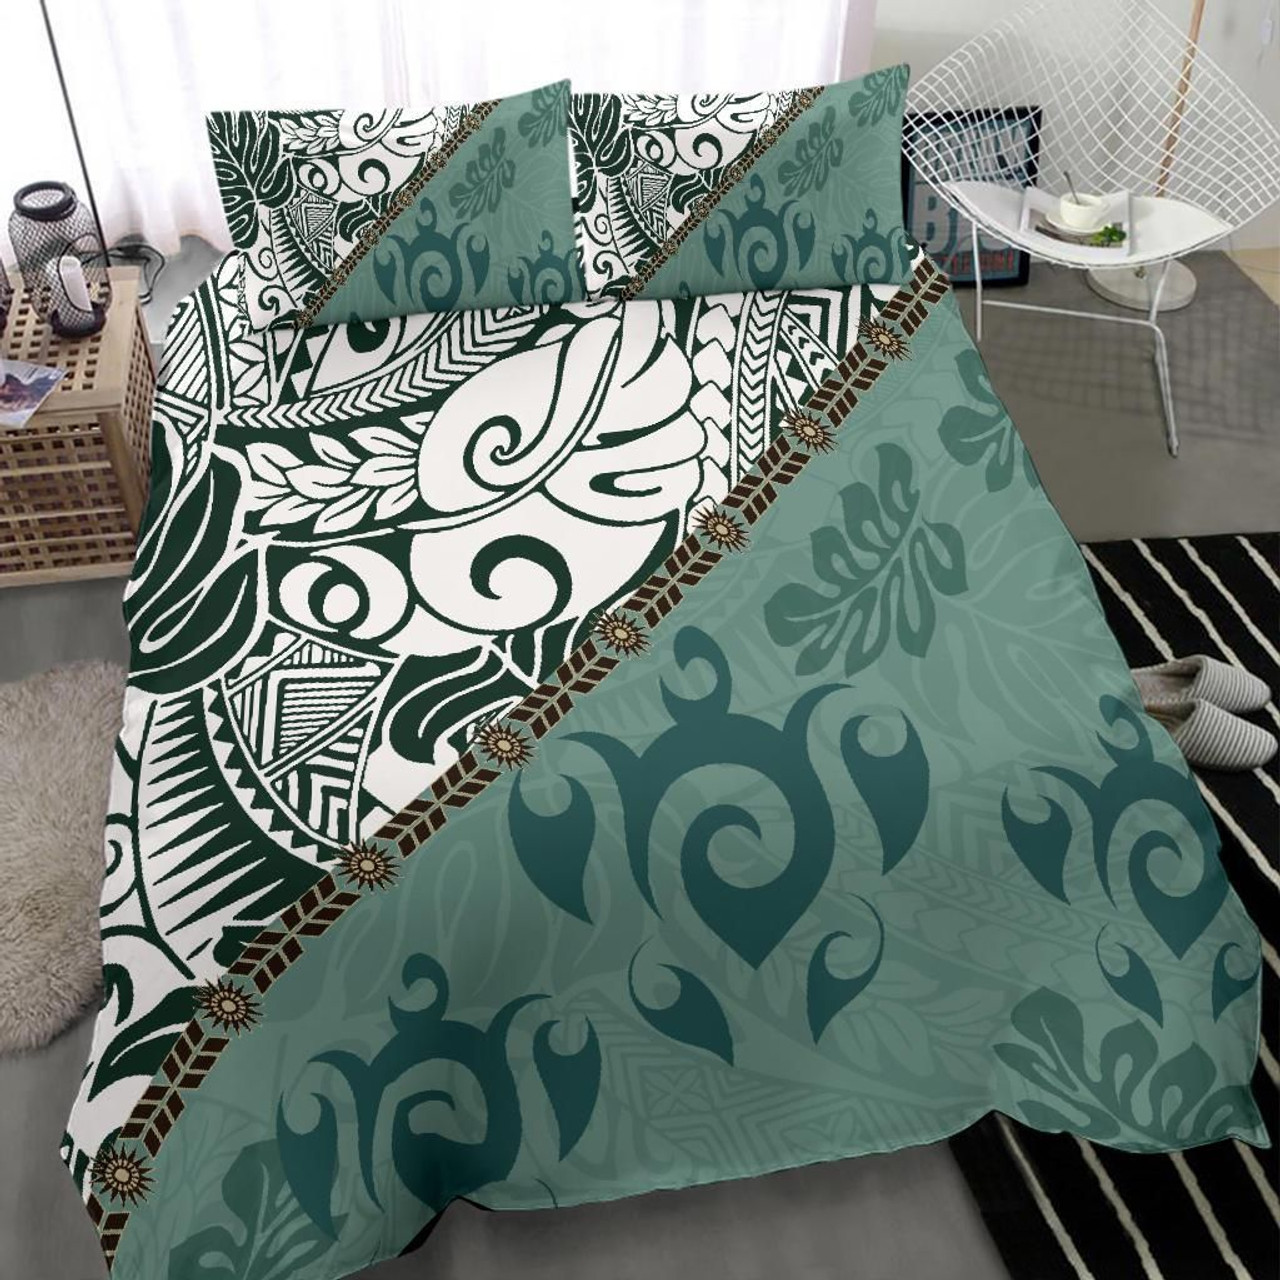 Polynesian Bedding Set - Leaves And Turtles 2